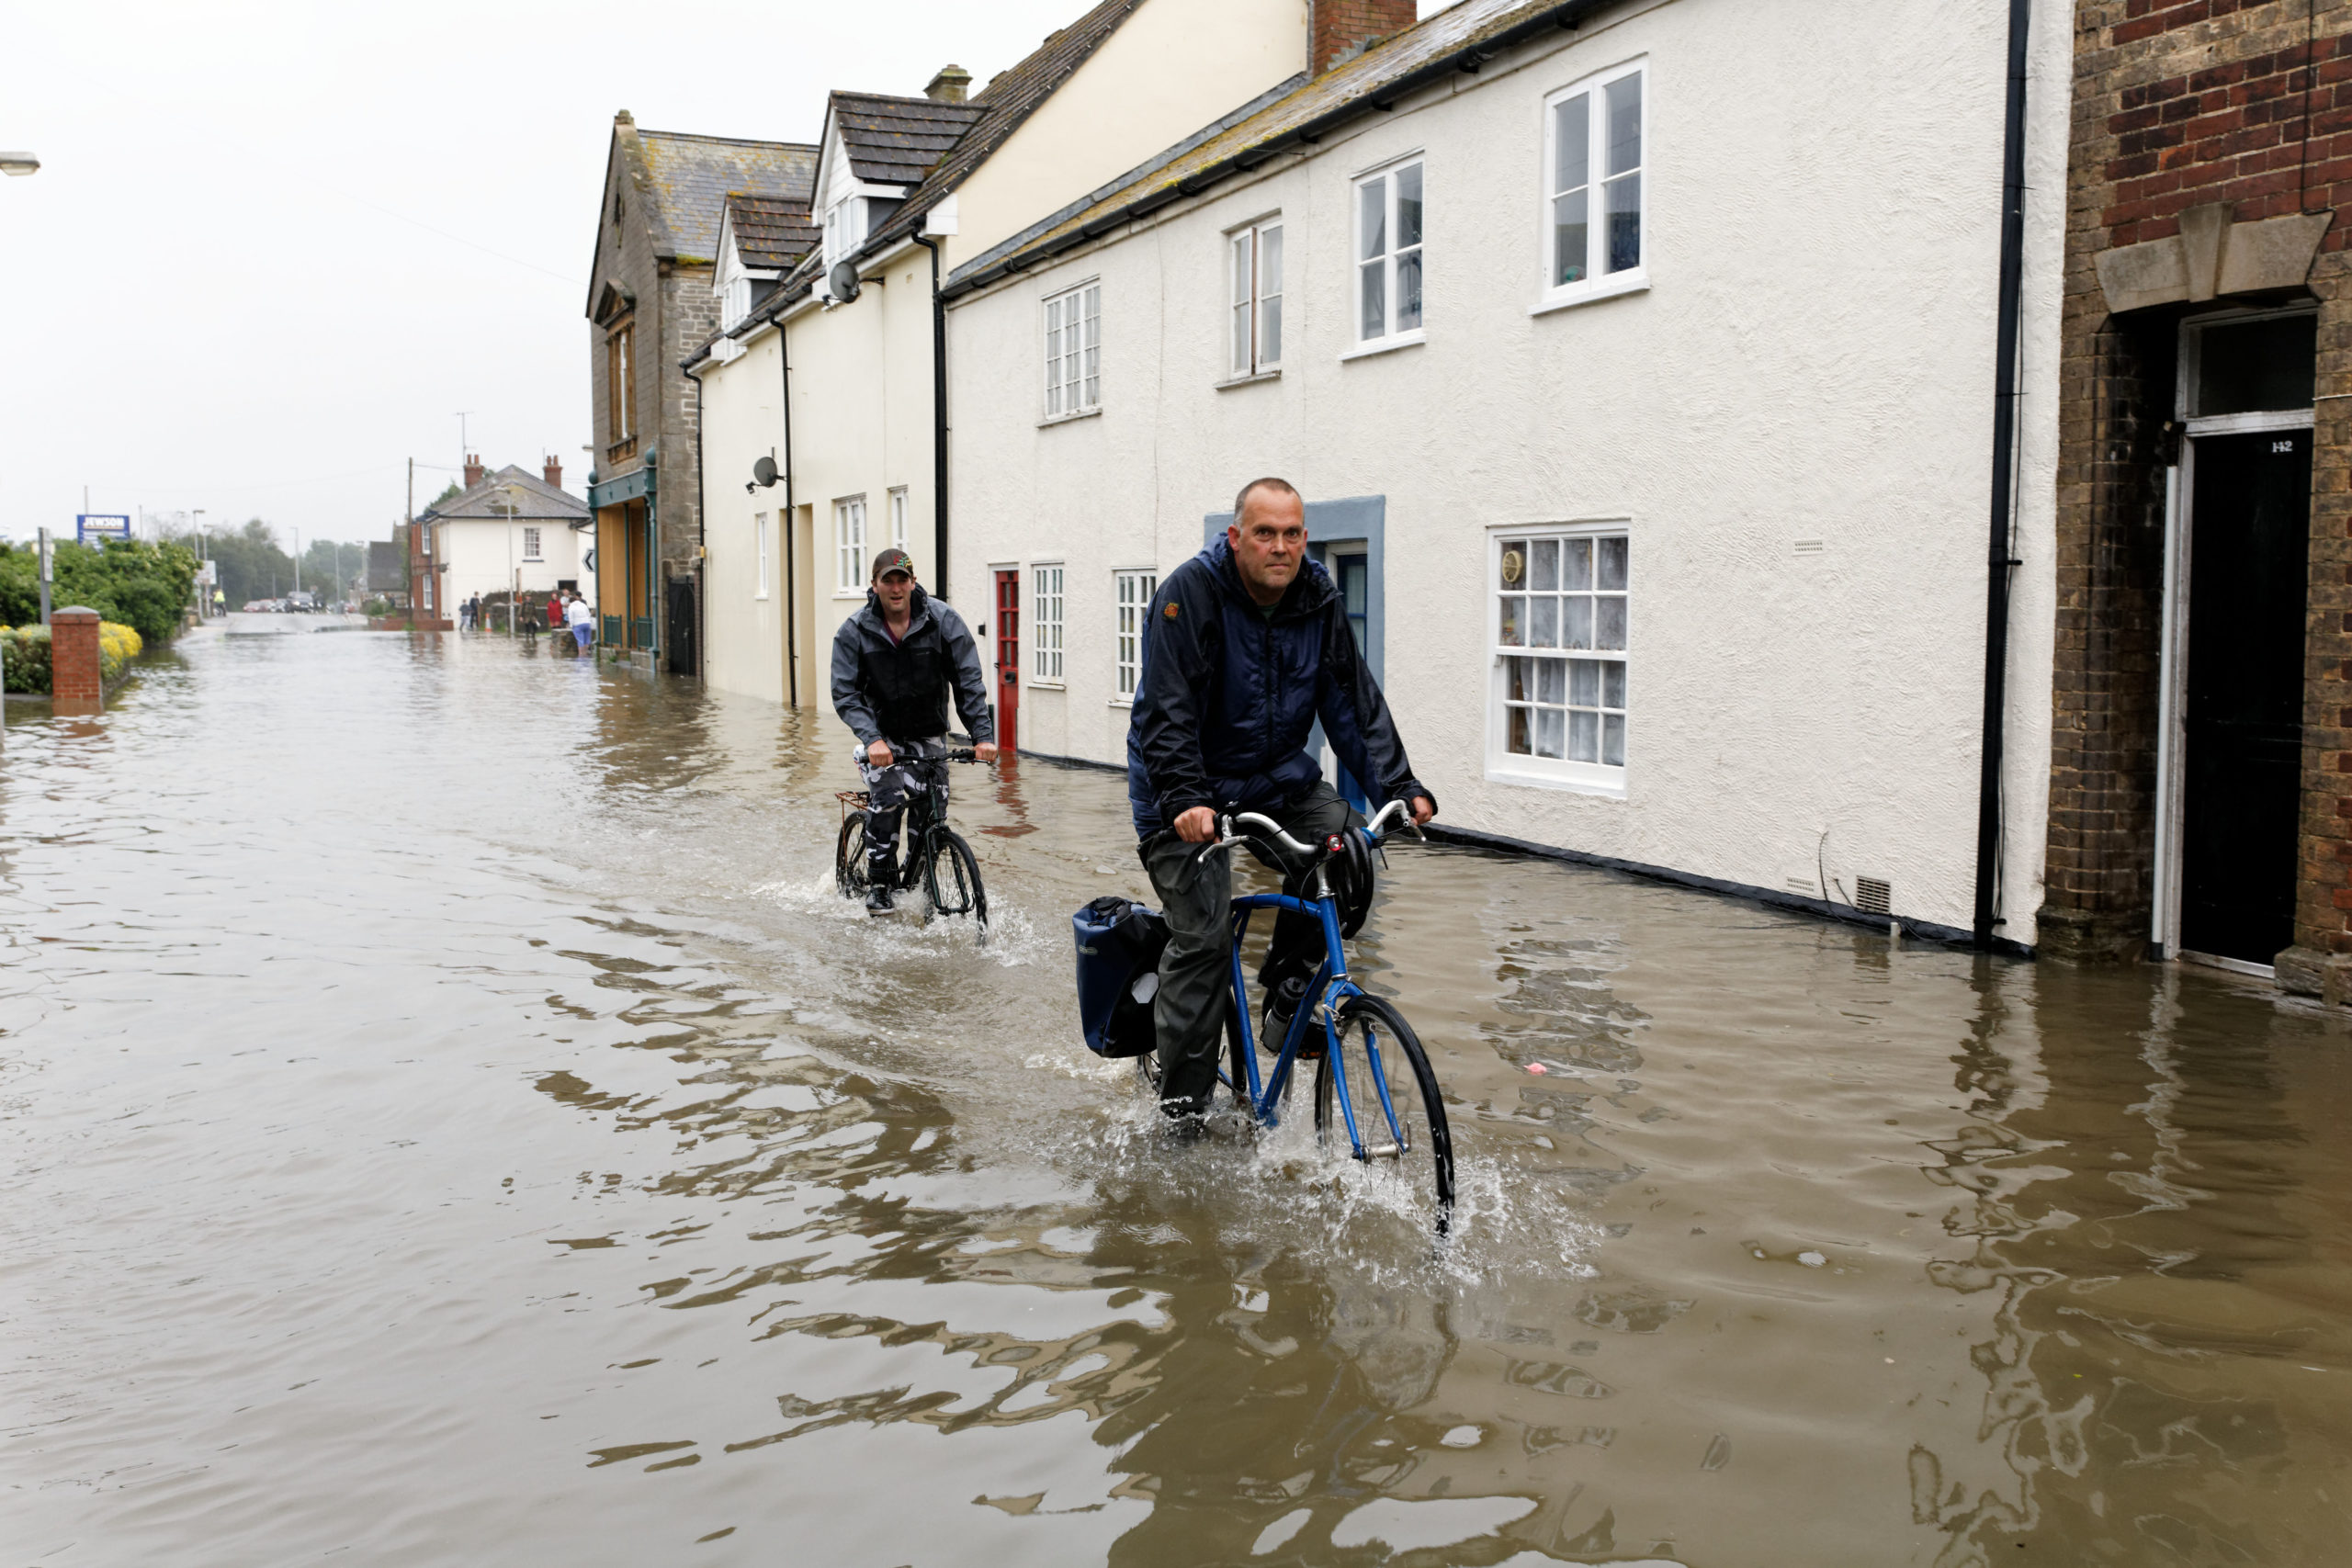 Enable Sunday trading laws to be suspended during major flooding, says think tank